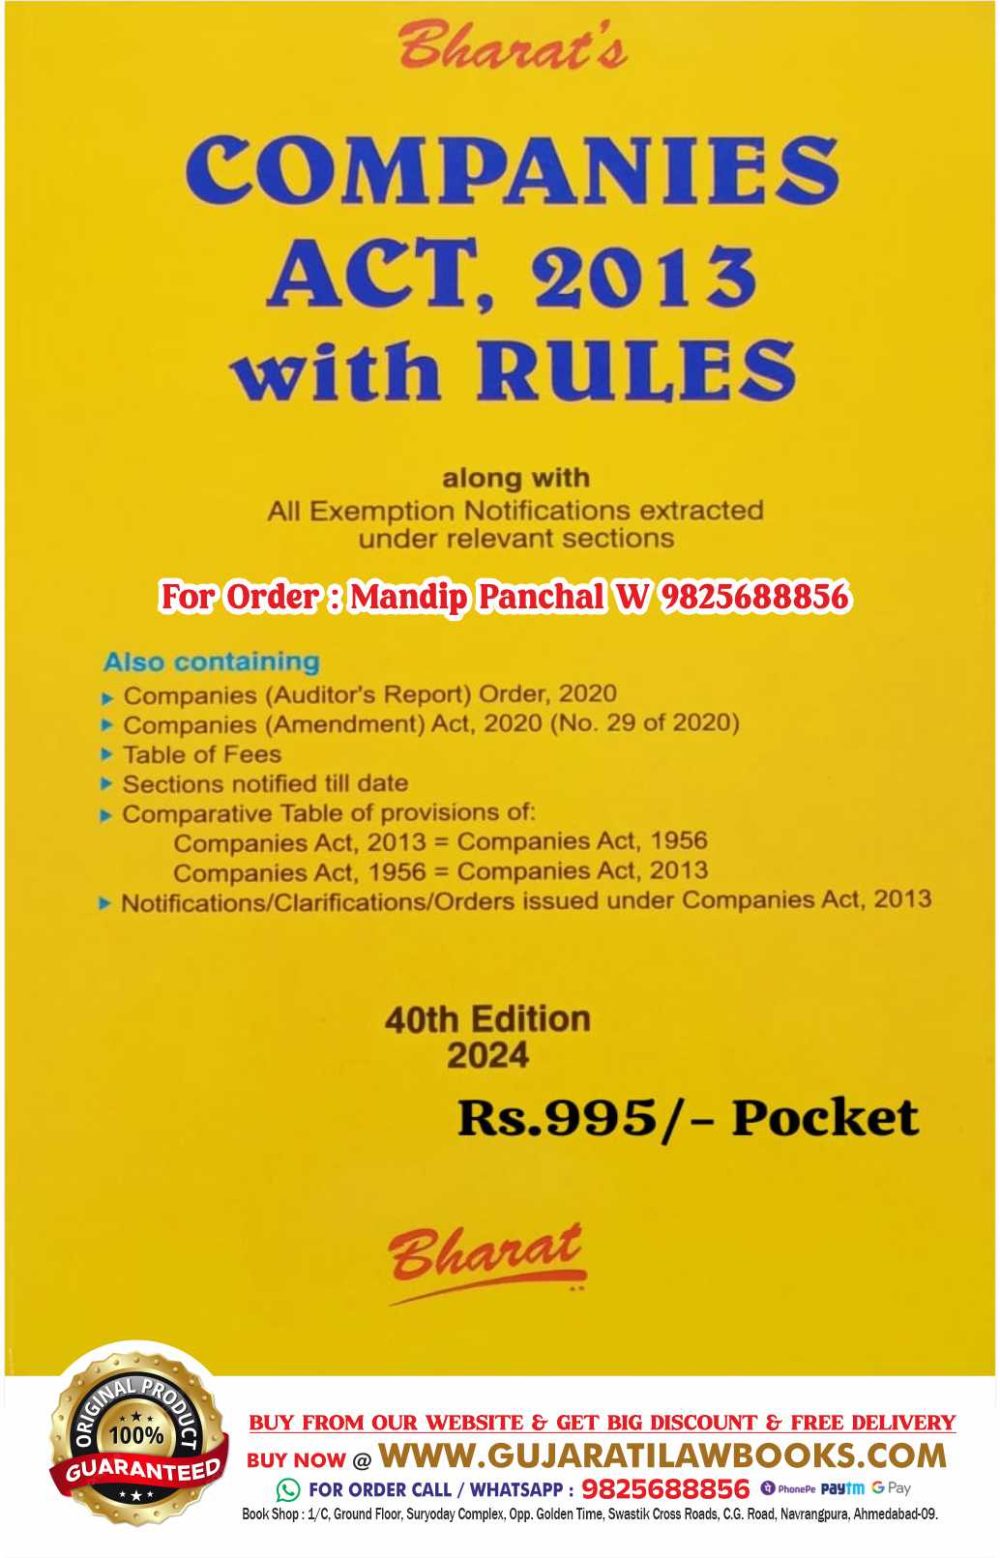 Bharat's COMPANIES ACT, 2013 WITH RULES (Pocket) - Latest 40th Edition 2024